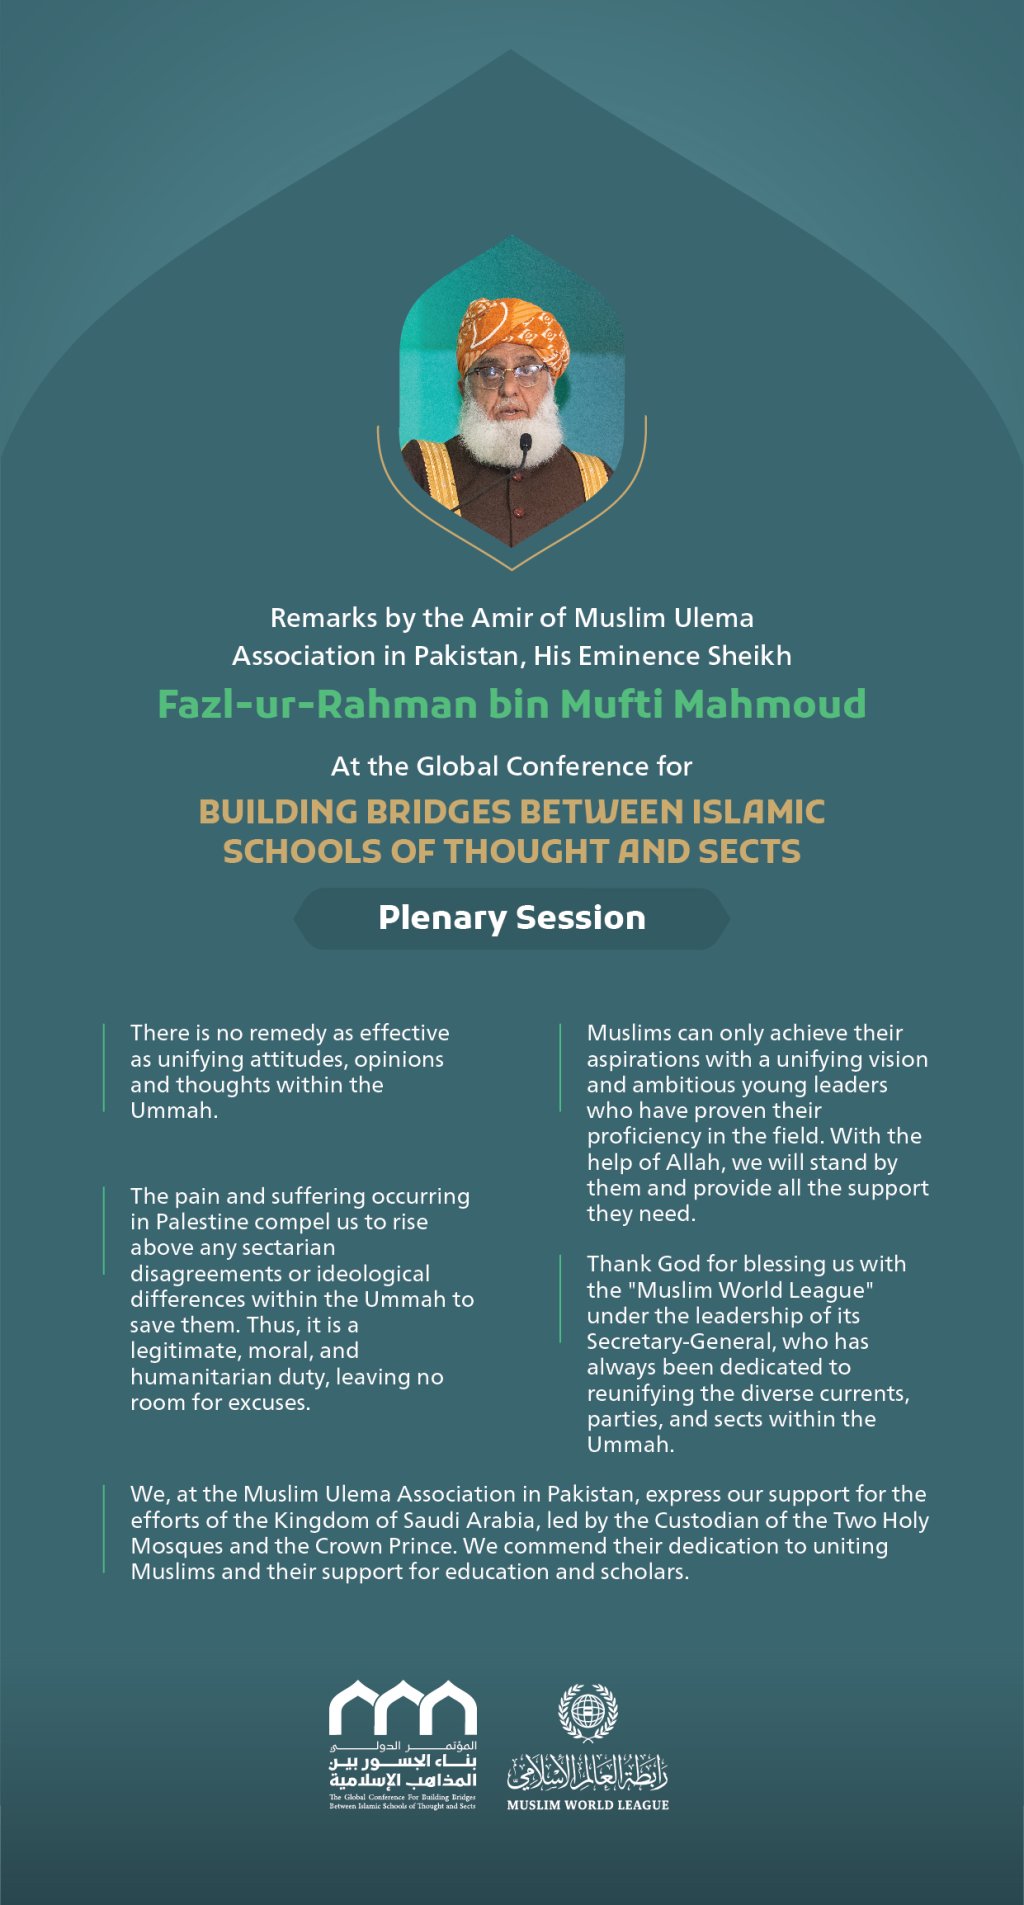 ”Unifying attitudes and thoughts” Remarks by His Eminence Sheikh Fazl-ur-Rahman ‎bin Mufti Mahmoud, the Amir of Muslim Ulema Association in Pakistan at the Global Conference for Building Bridges between Islamic Schools of Thought and Sects.